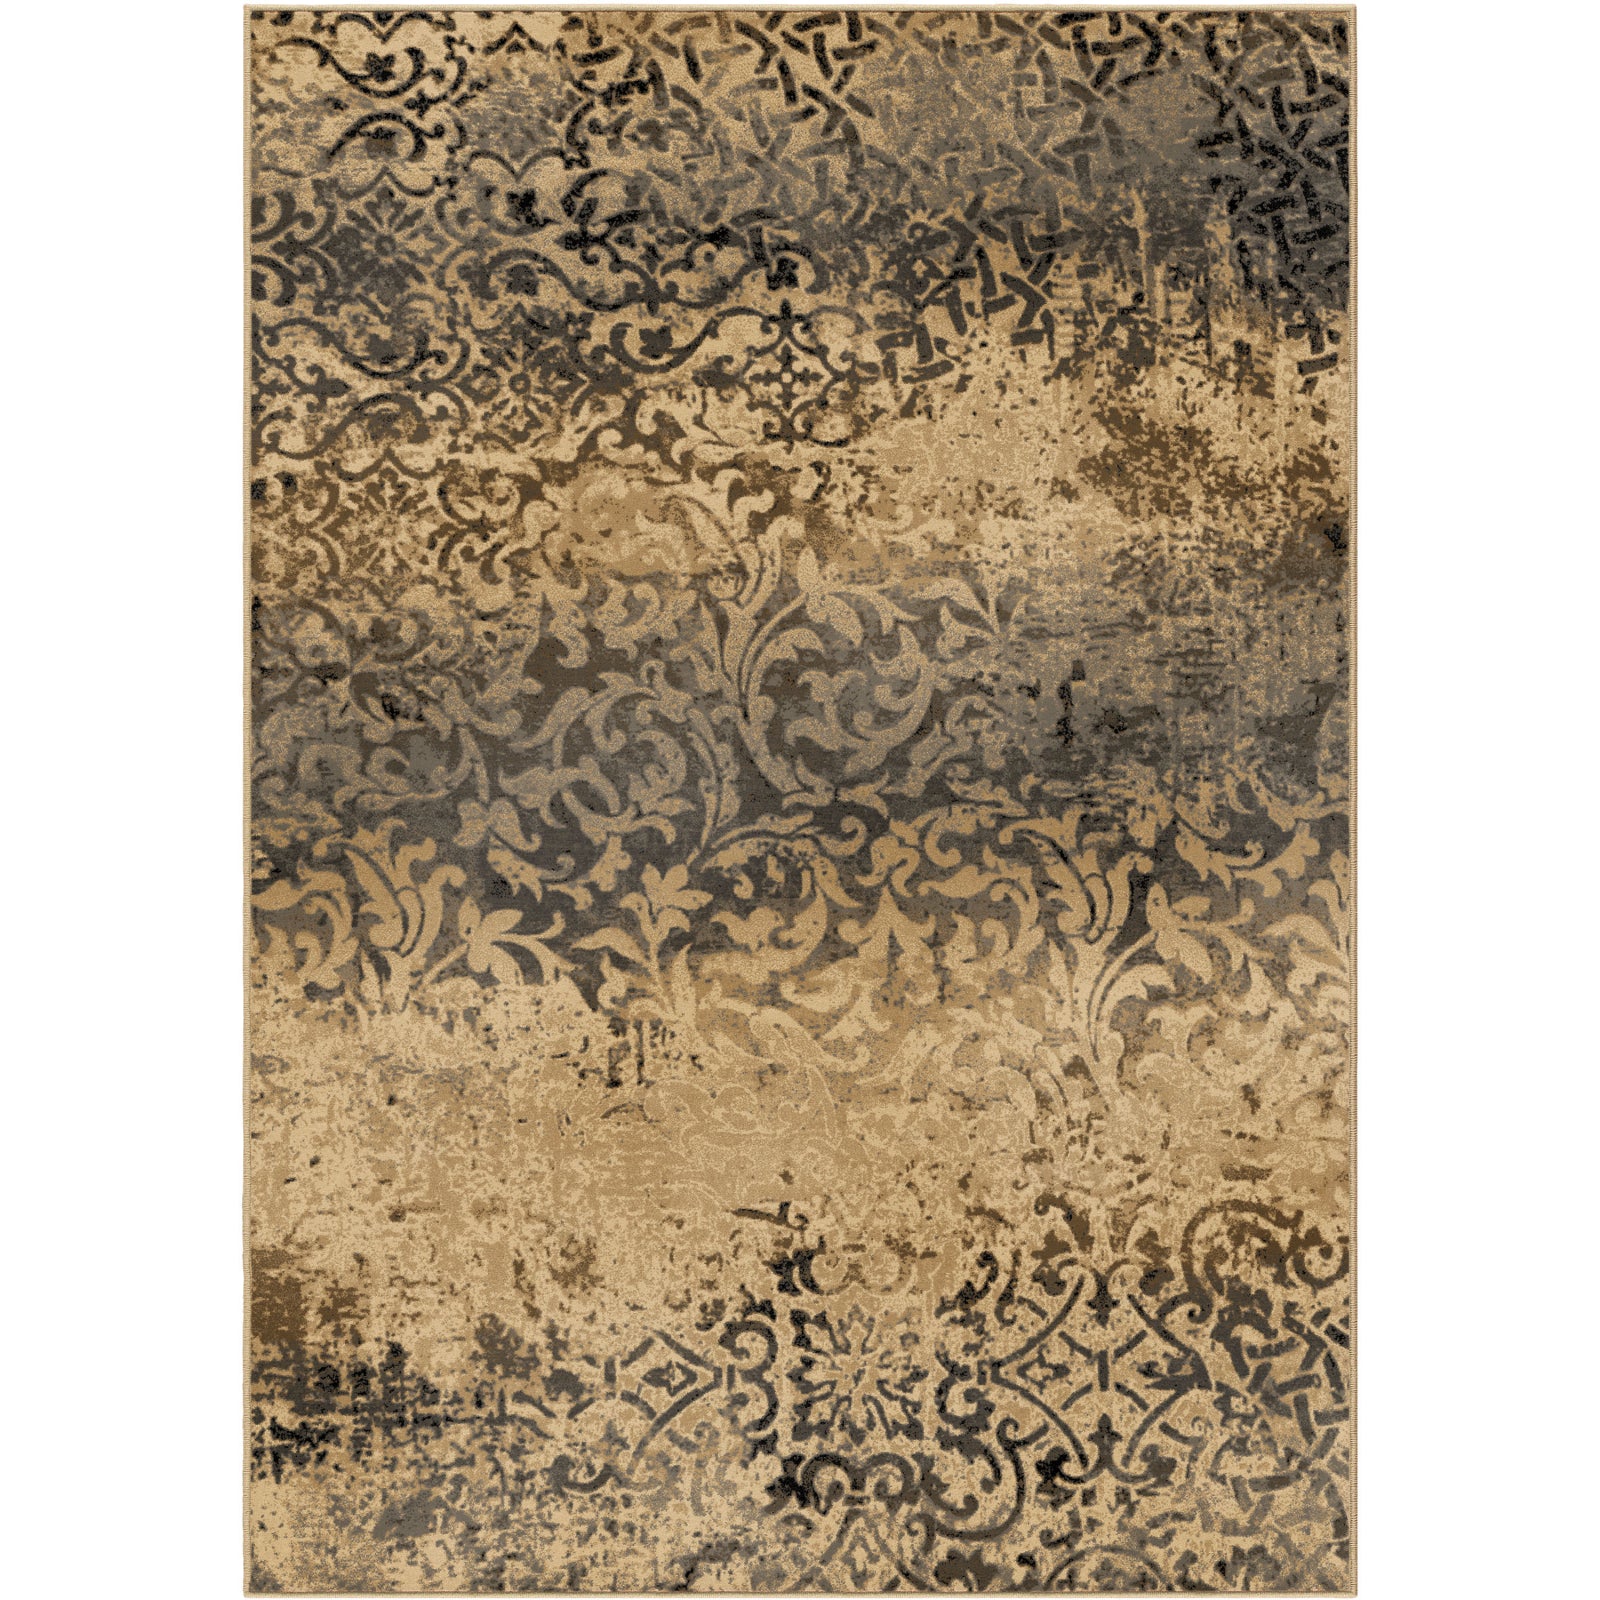 Orian Rugs Orwell Parched Scroll Beige Area Rug main image